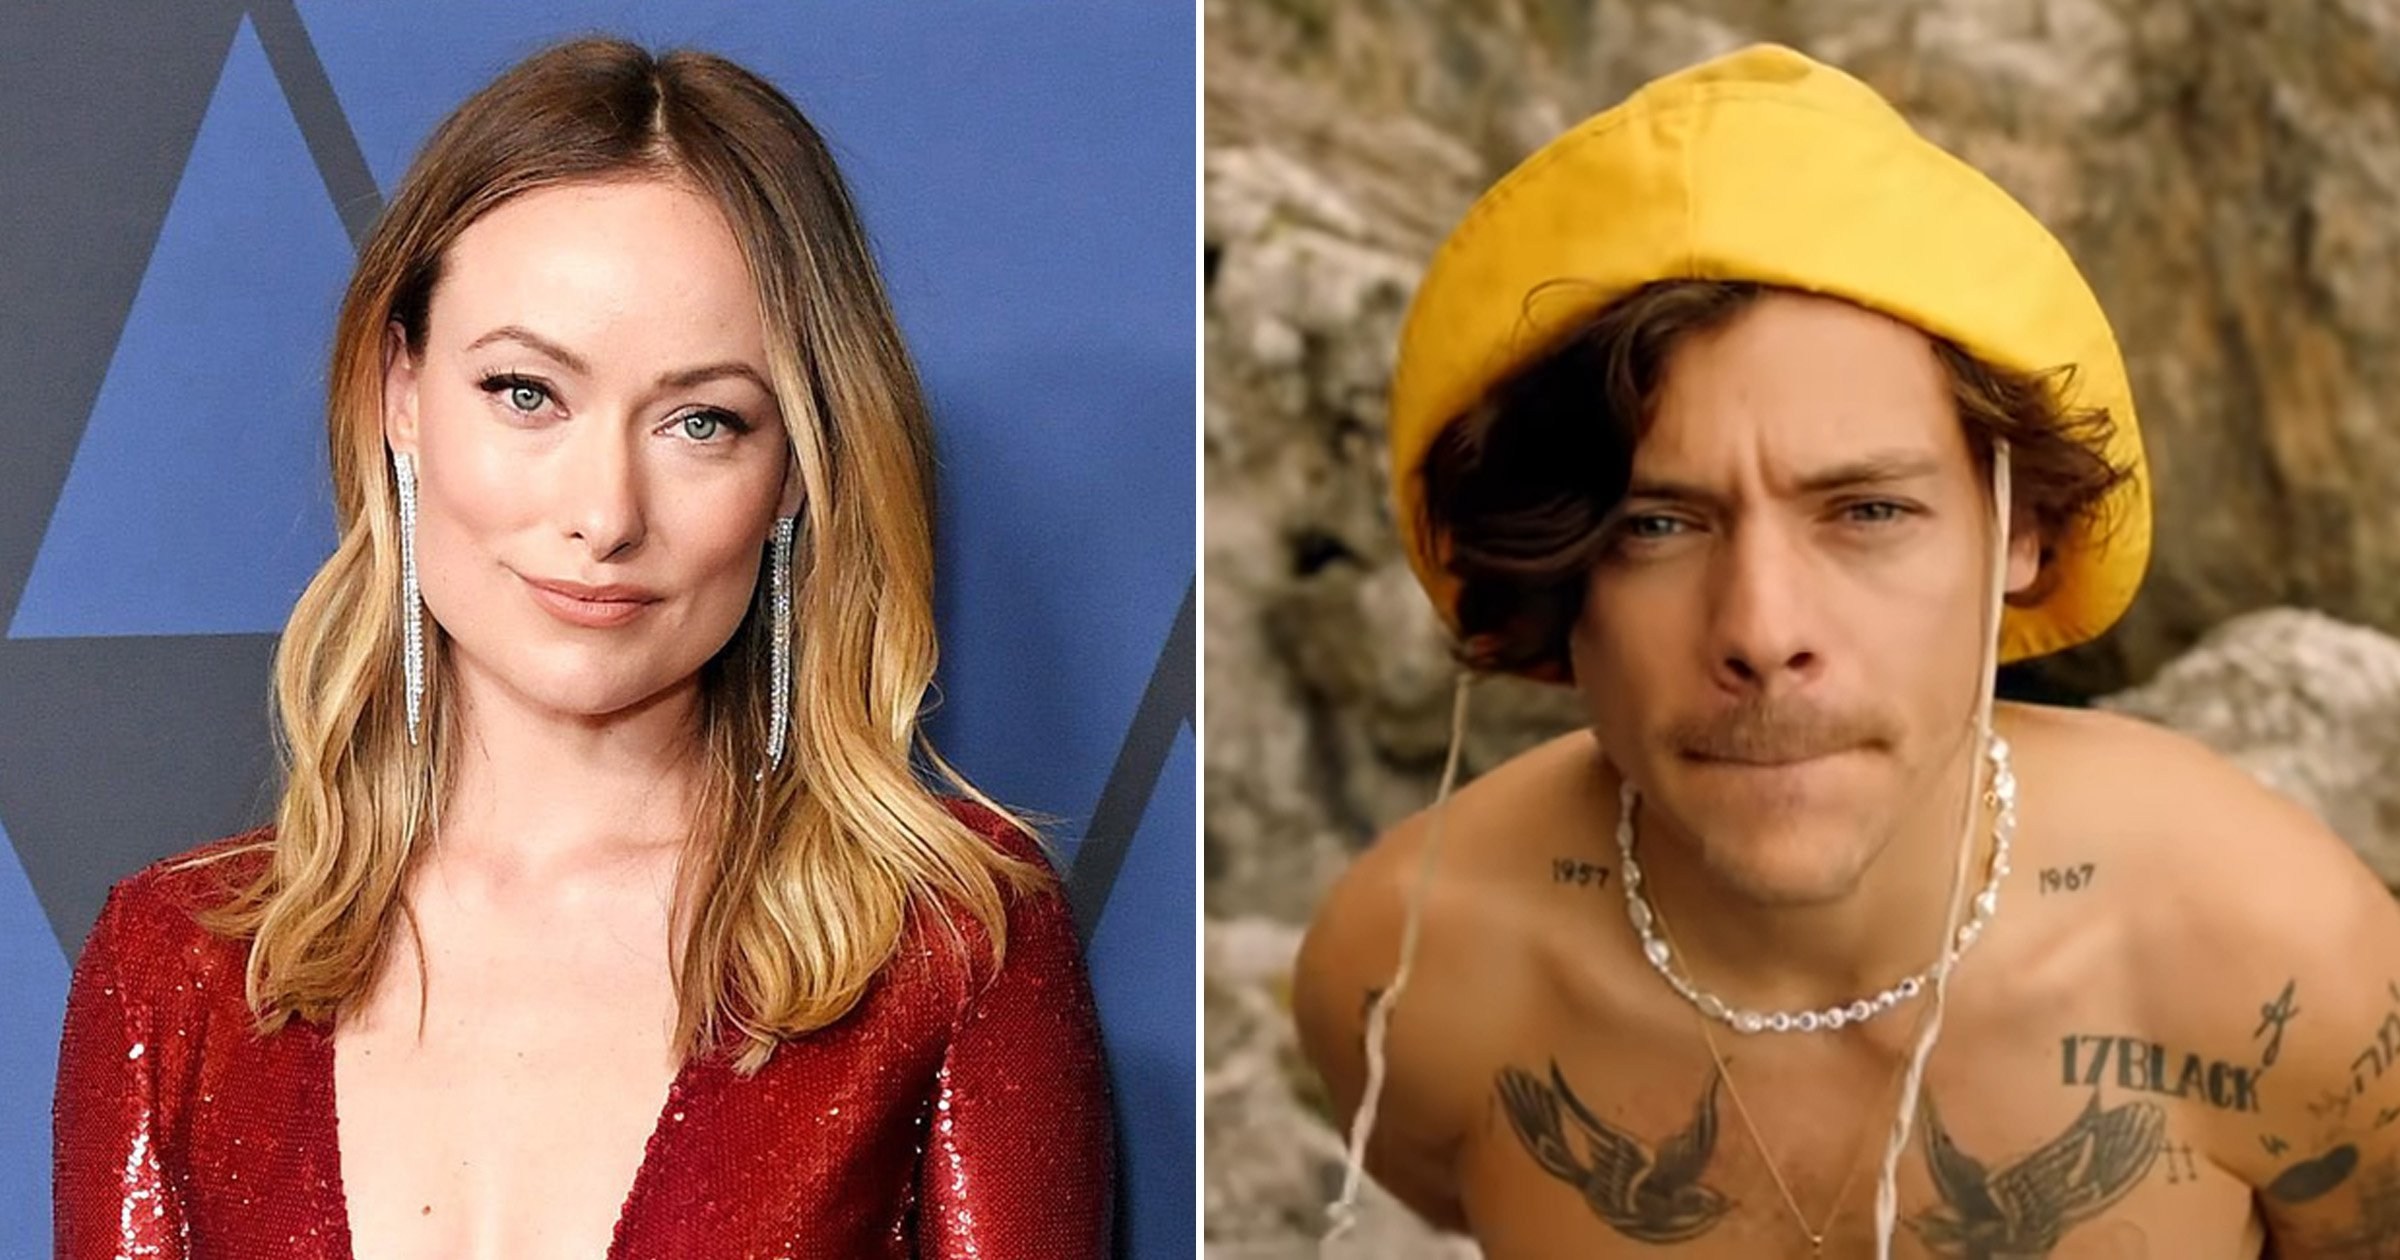 Olivia Wilde ‘wears Harry Styles’ necklace’ as she’s spotted in identical pearls